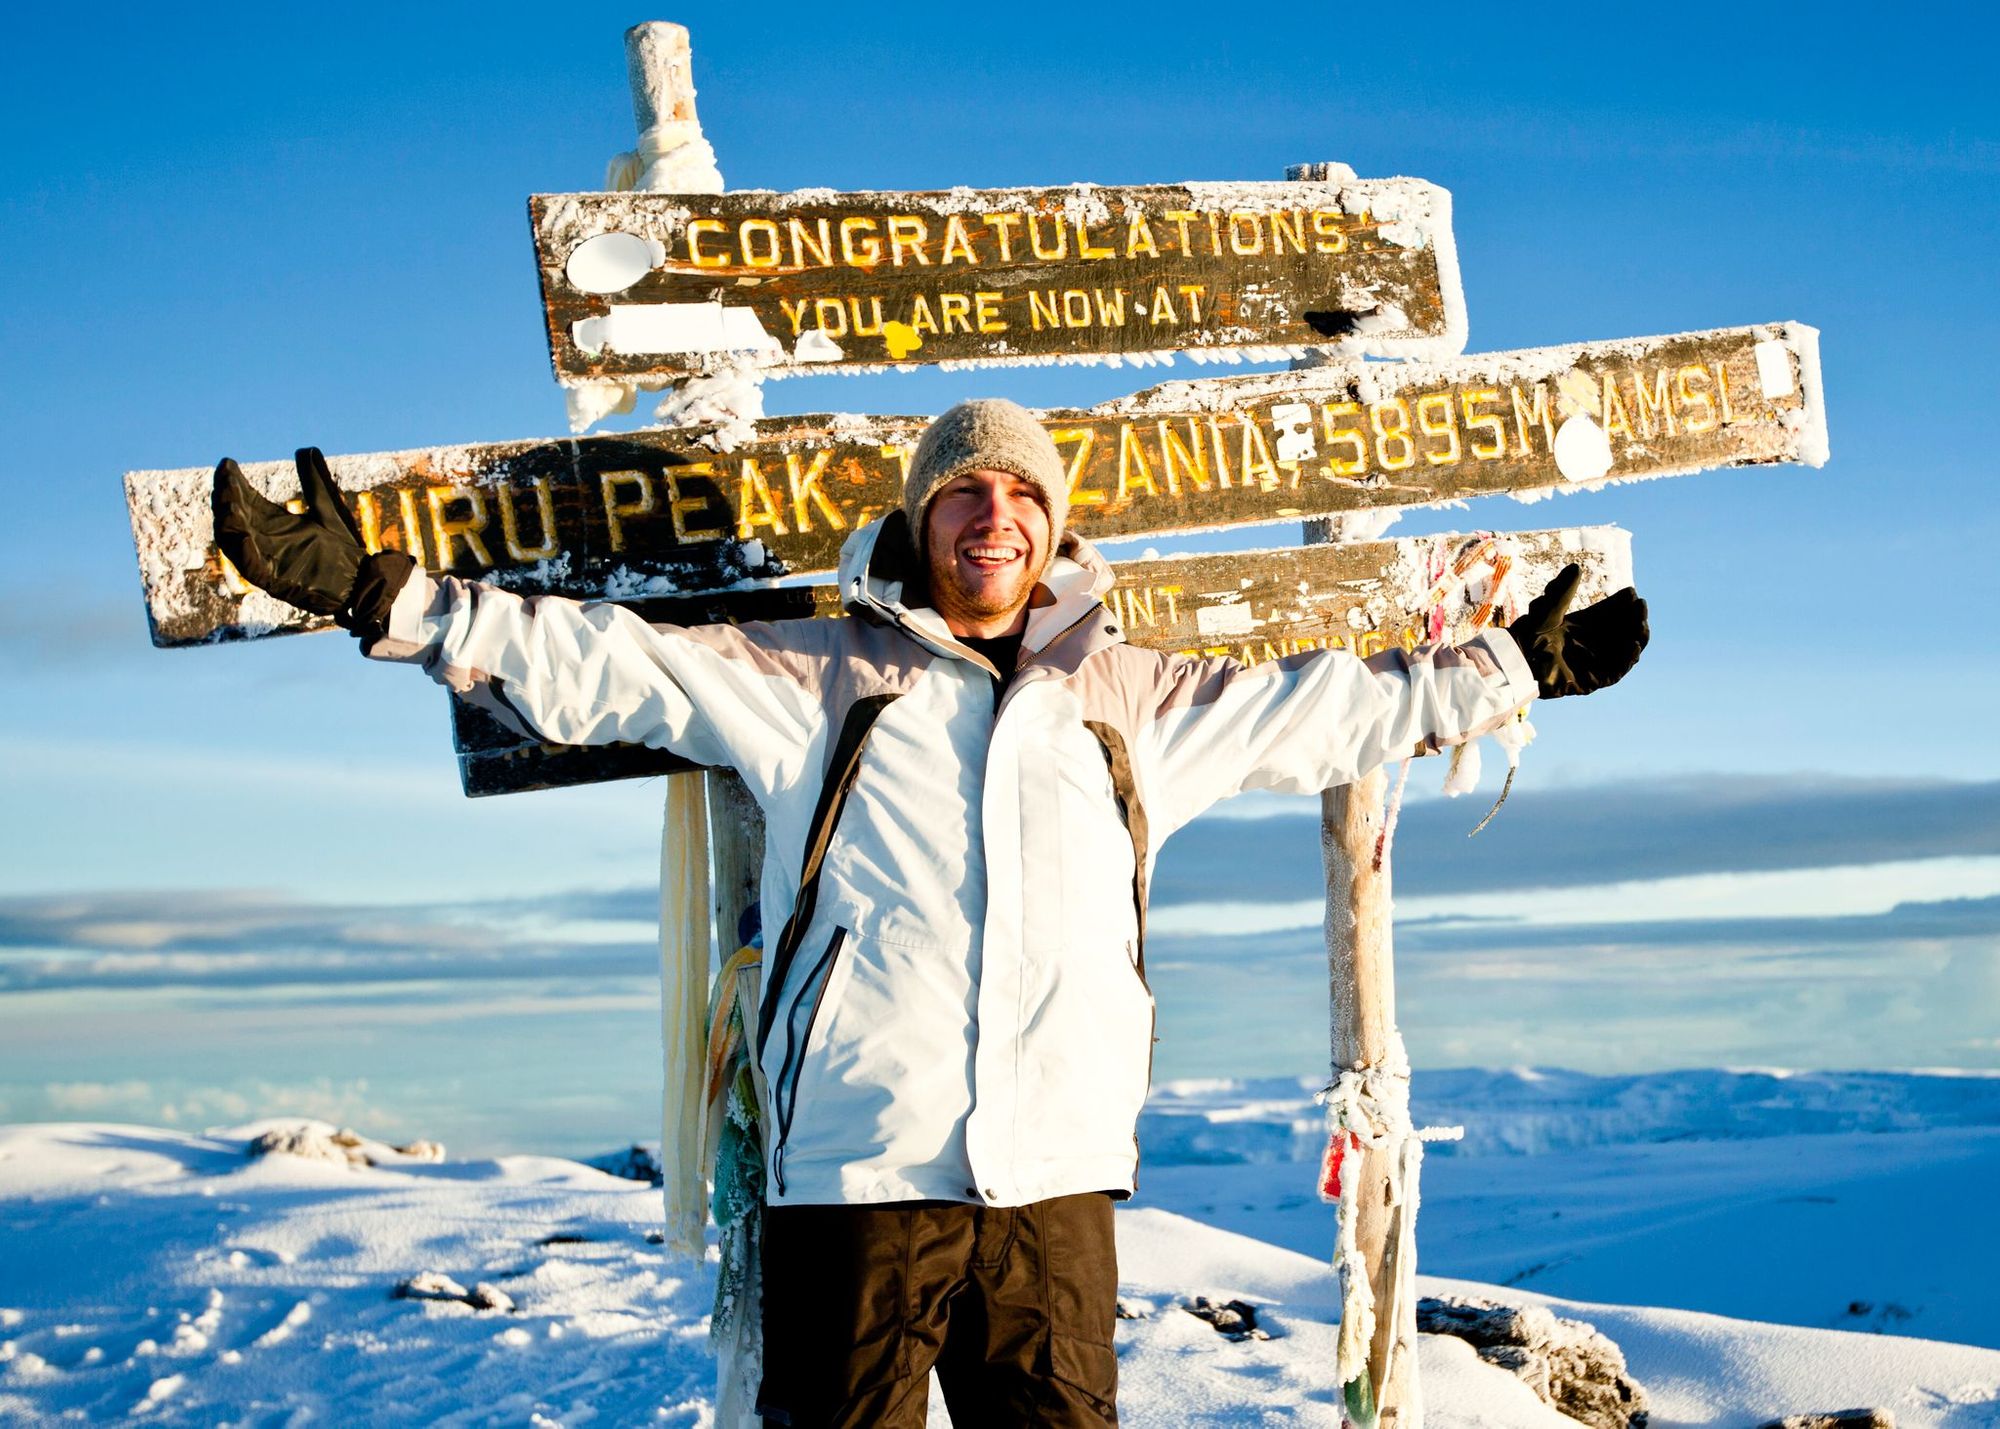 A man poses in front of the 'congratulations' sign at the top of Mount Kilimanjaro, Tanzania